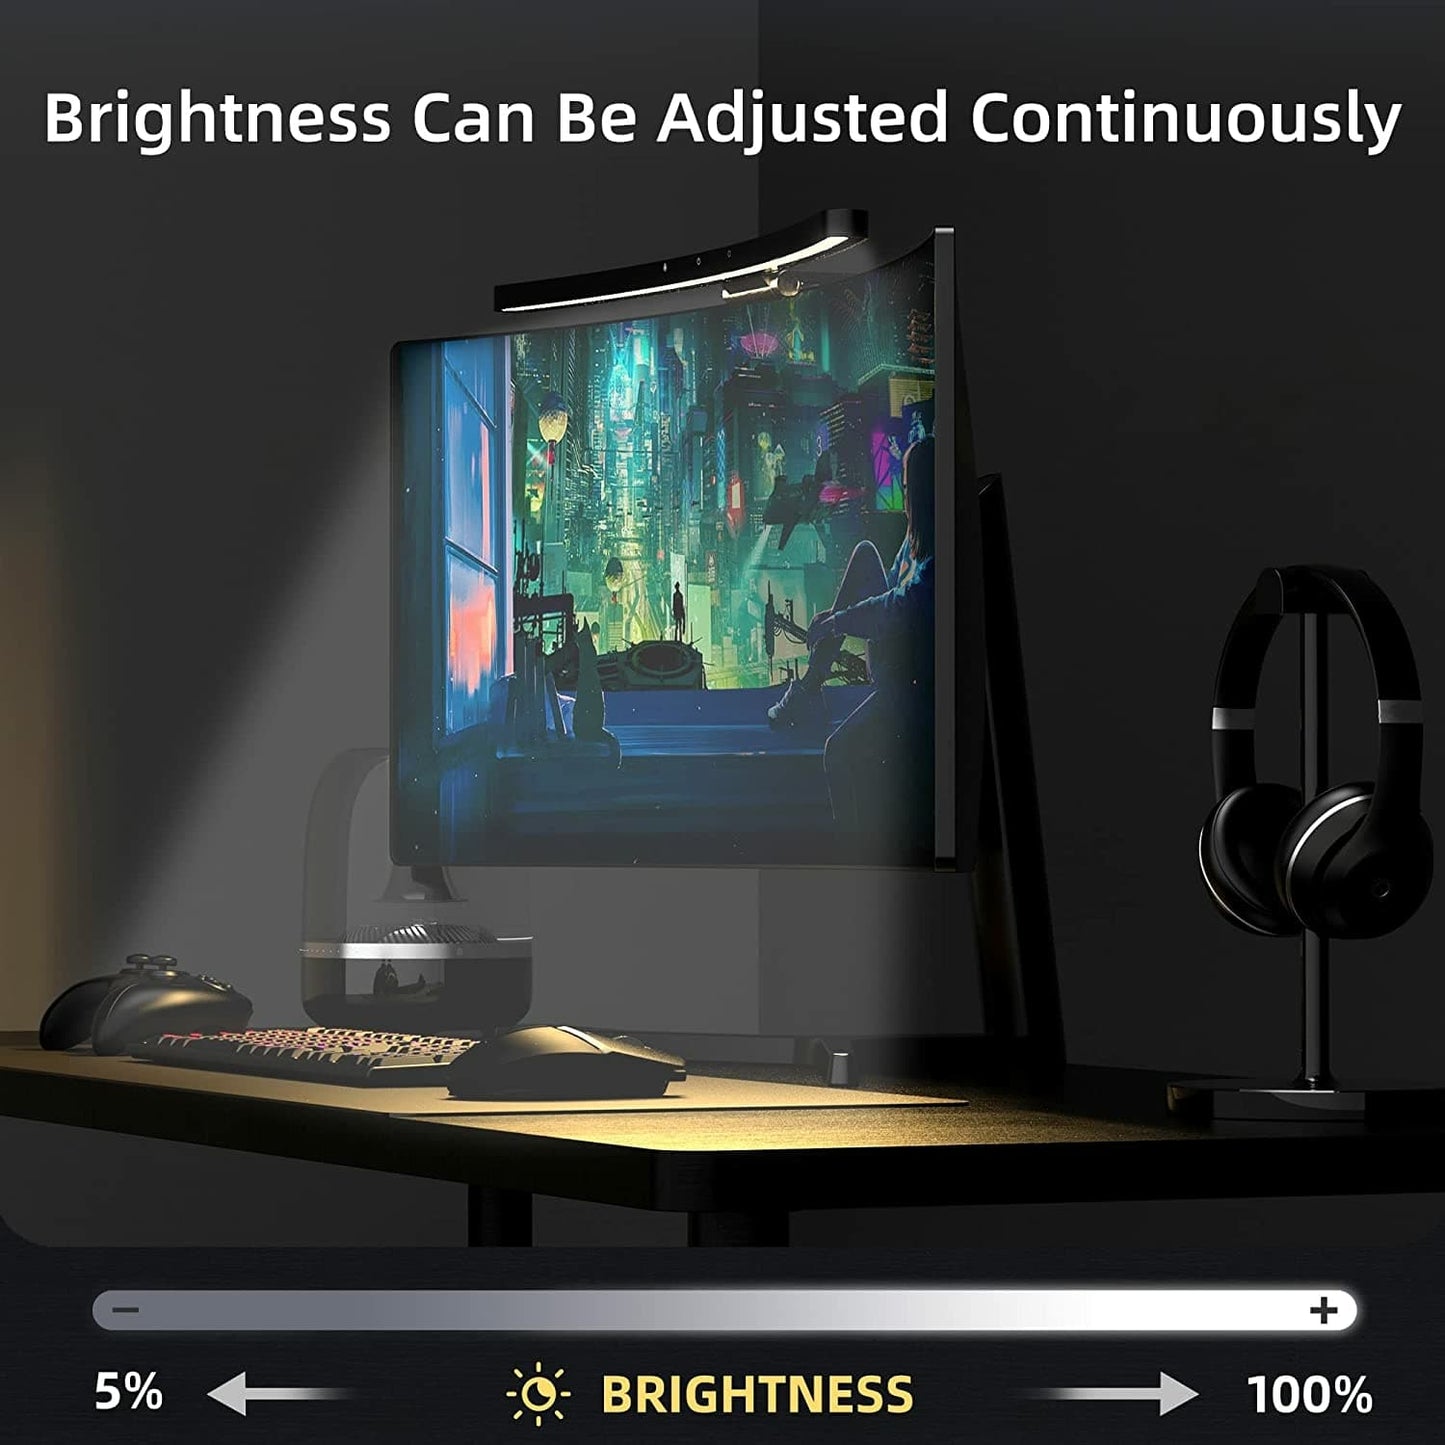 Detailed information about the stepless brightness adjustment. Our LEDs can be adjusted anywhere from 5% to 100% brightness to suit your current situation best. The range makes our light bar ideal for any workspace at any time of day.